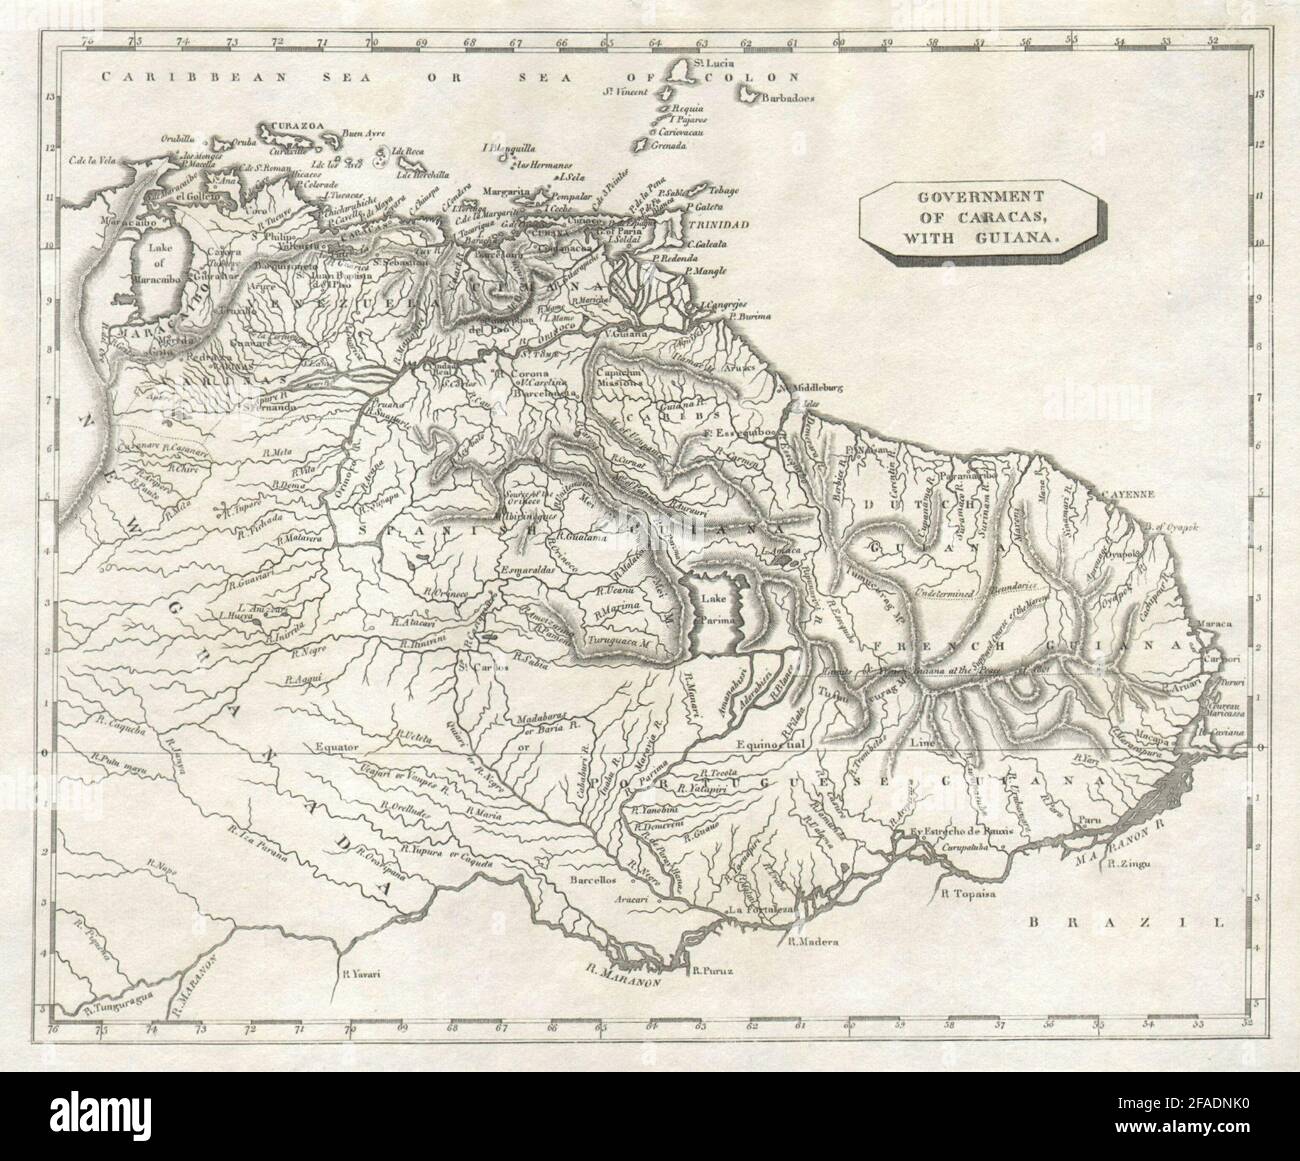 Government of Caracas with Guiana by Arrowsmith & Lewis. Venezuela 1812 map Stock Photo